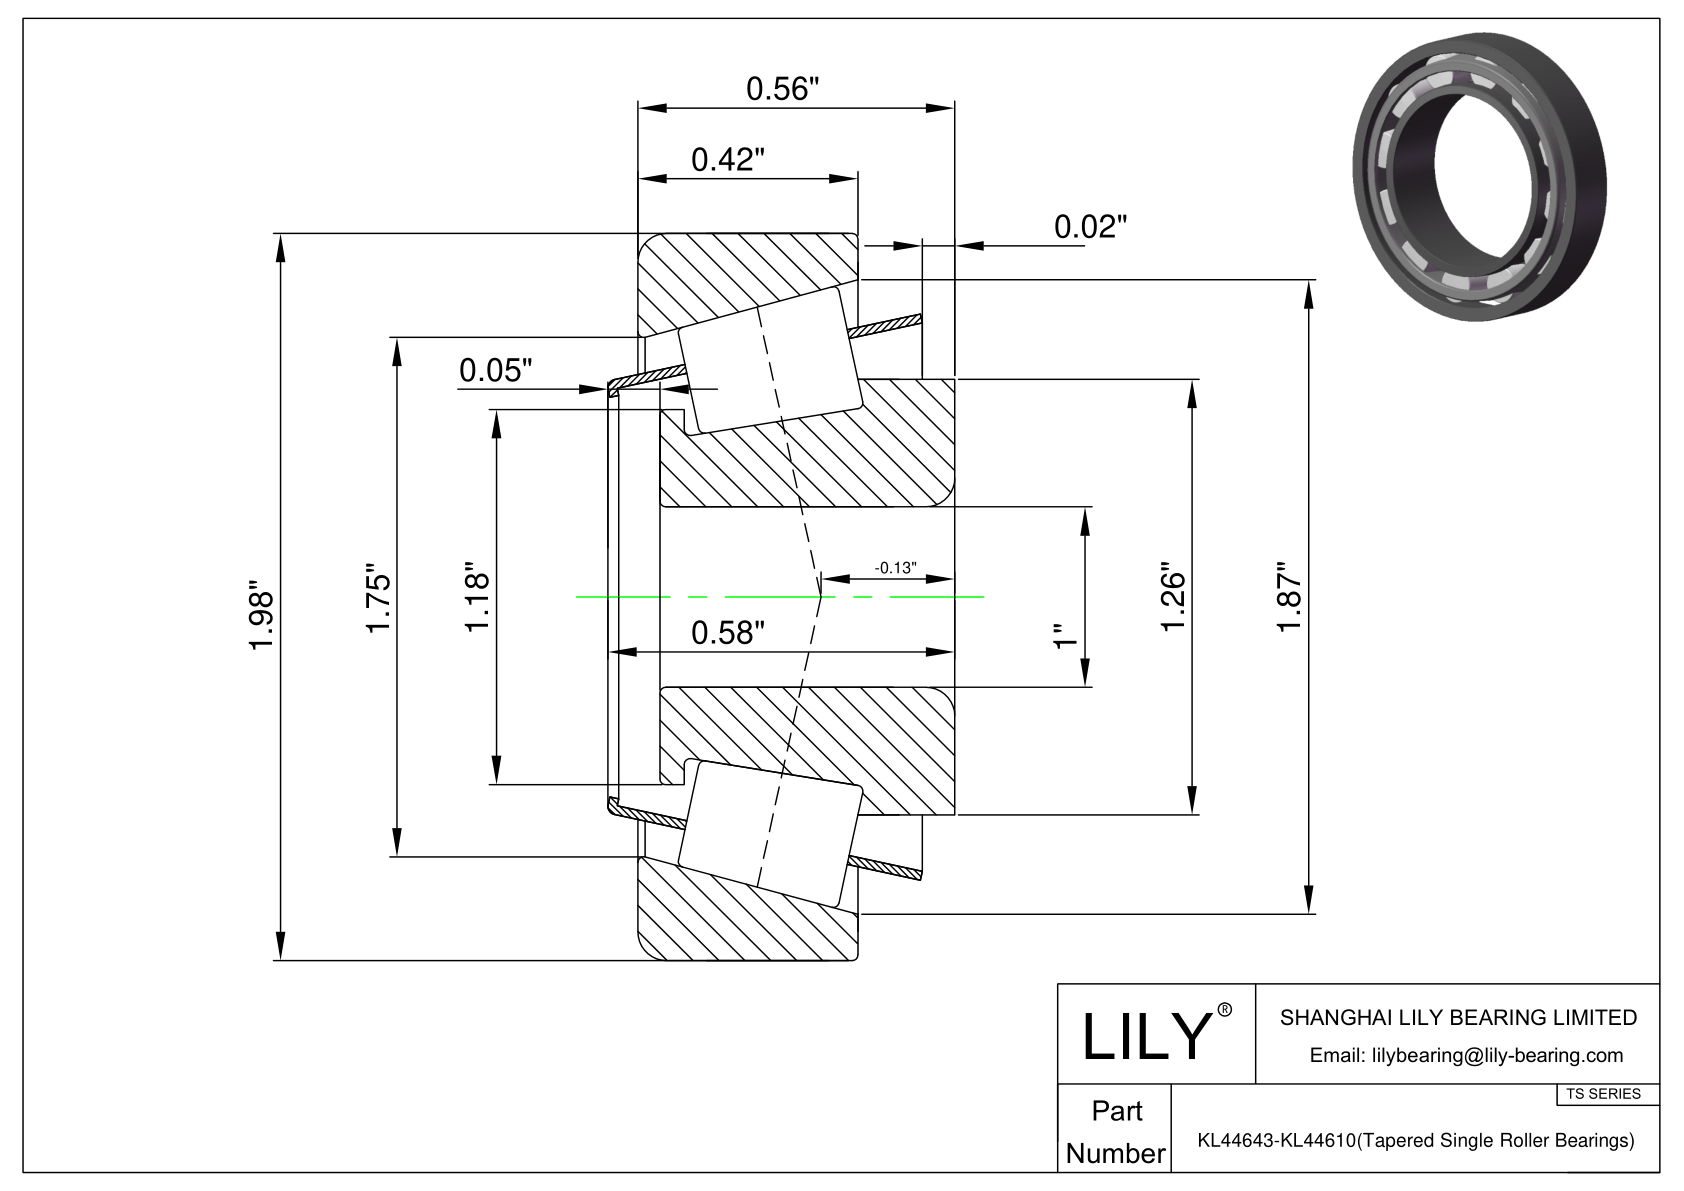 KL44643-KL44610 TS (Tapered Single Roller Bearings) (Imperial) cad drawing